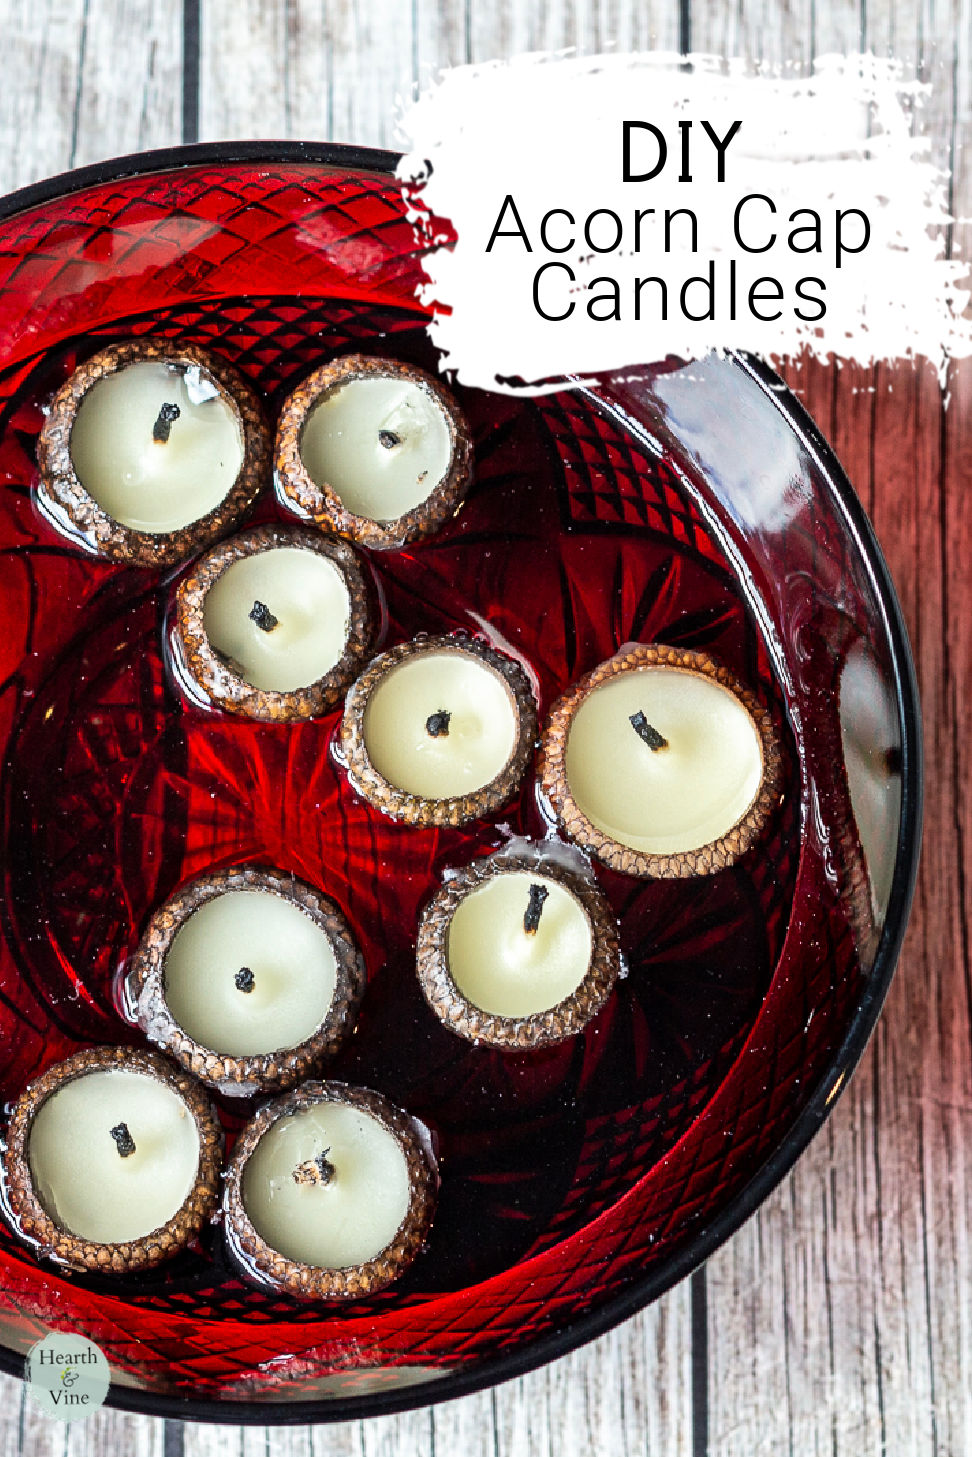 Acorn cap candles floating in a red bowl of water.